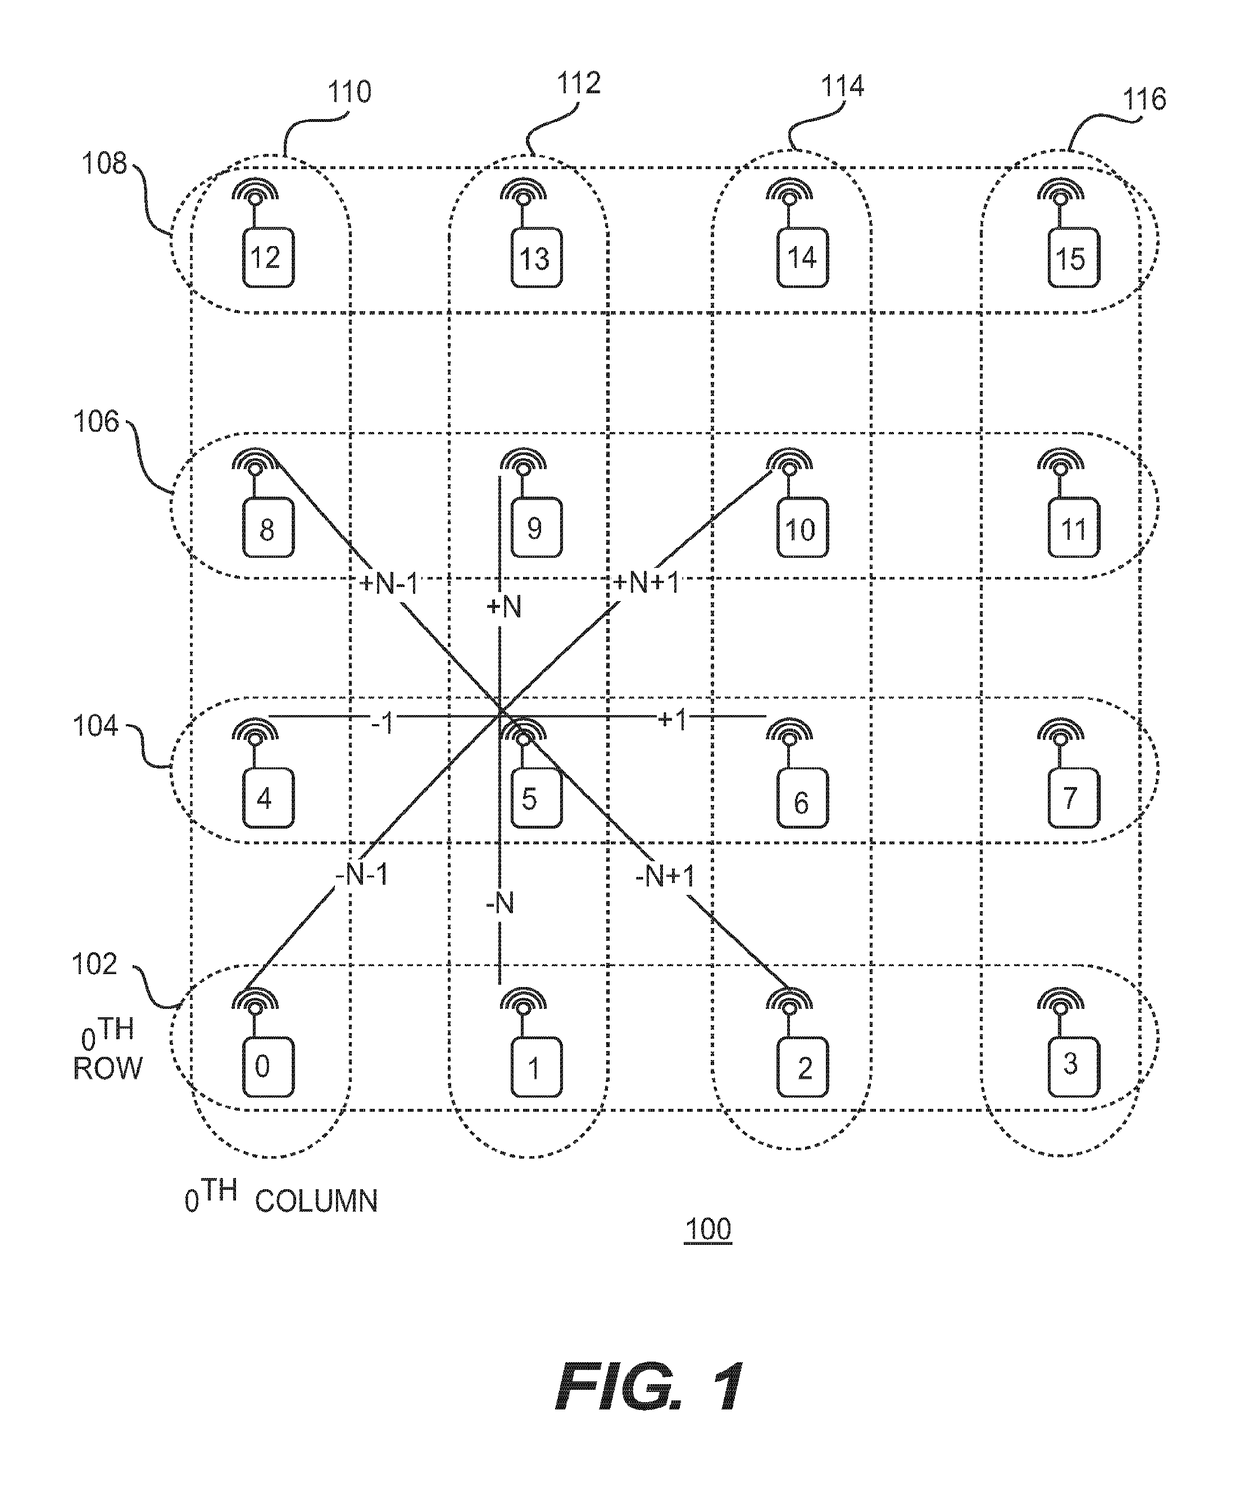 ID-based routing protocol for wireless network with a grid topology